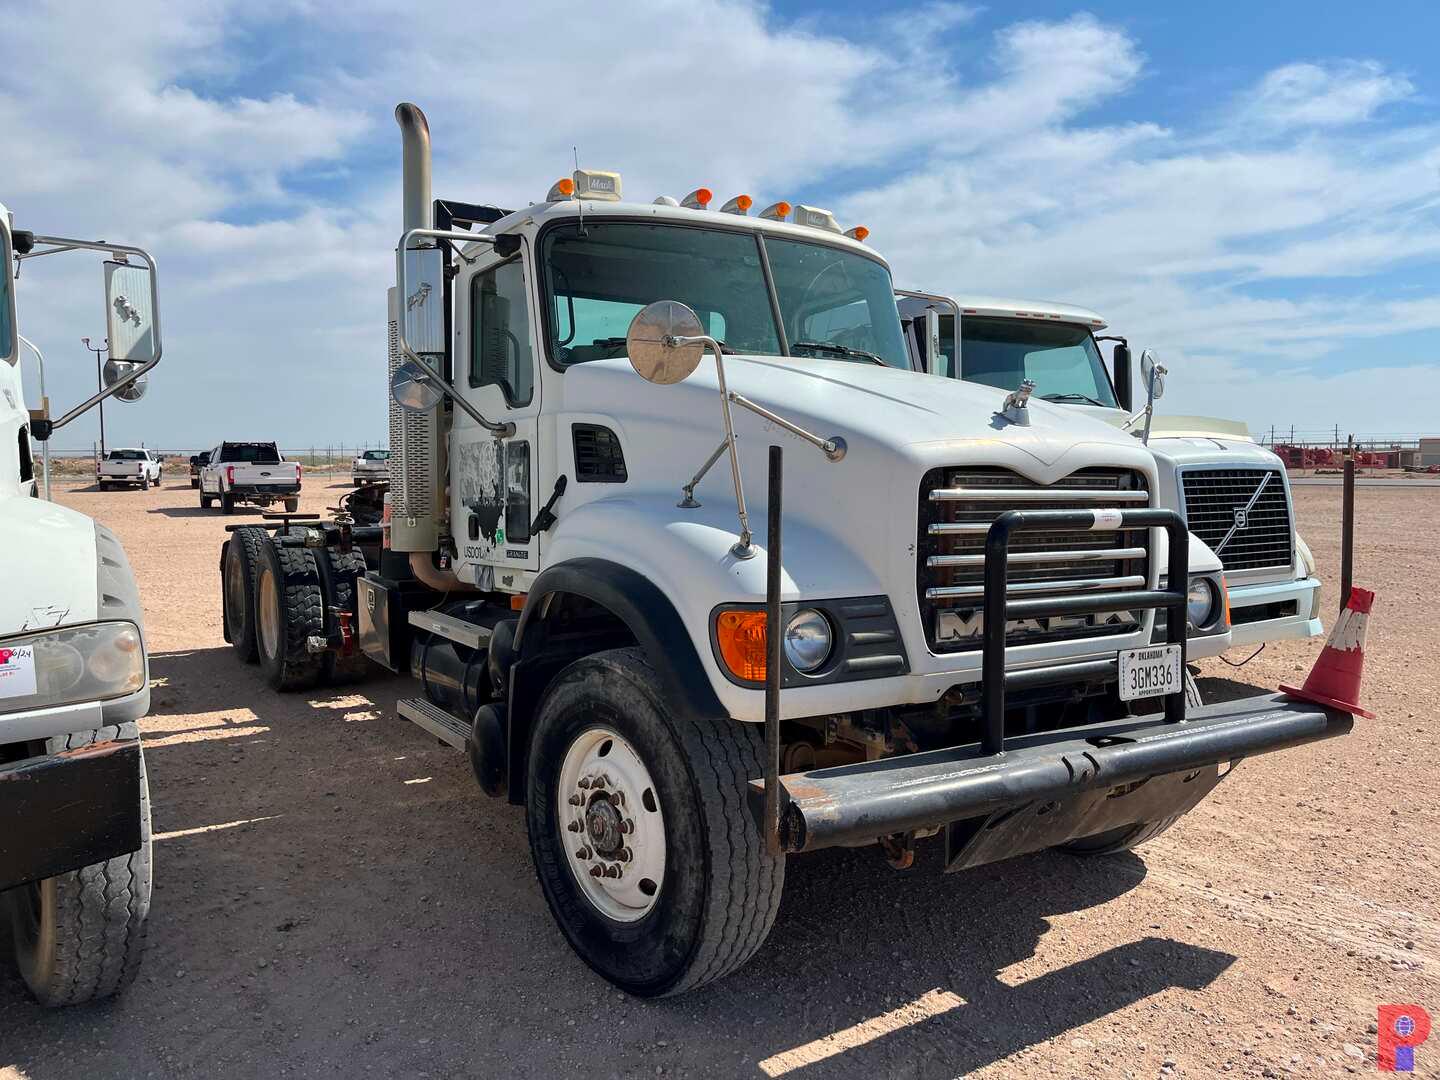 2006 MACK CV713 T/A DAYCAB KILL TRUCK ODOMETER READS 167473 MILES, METER RE